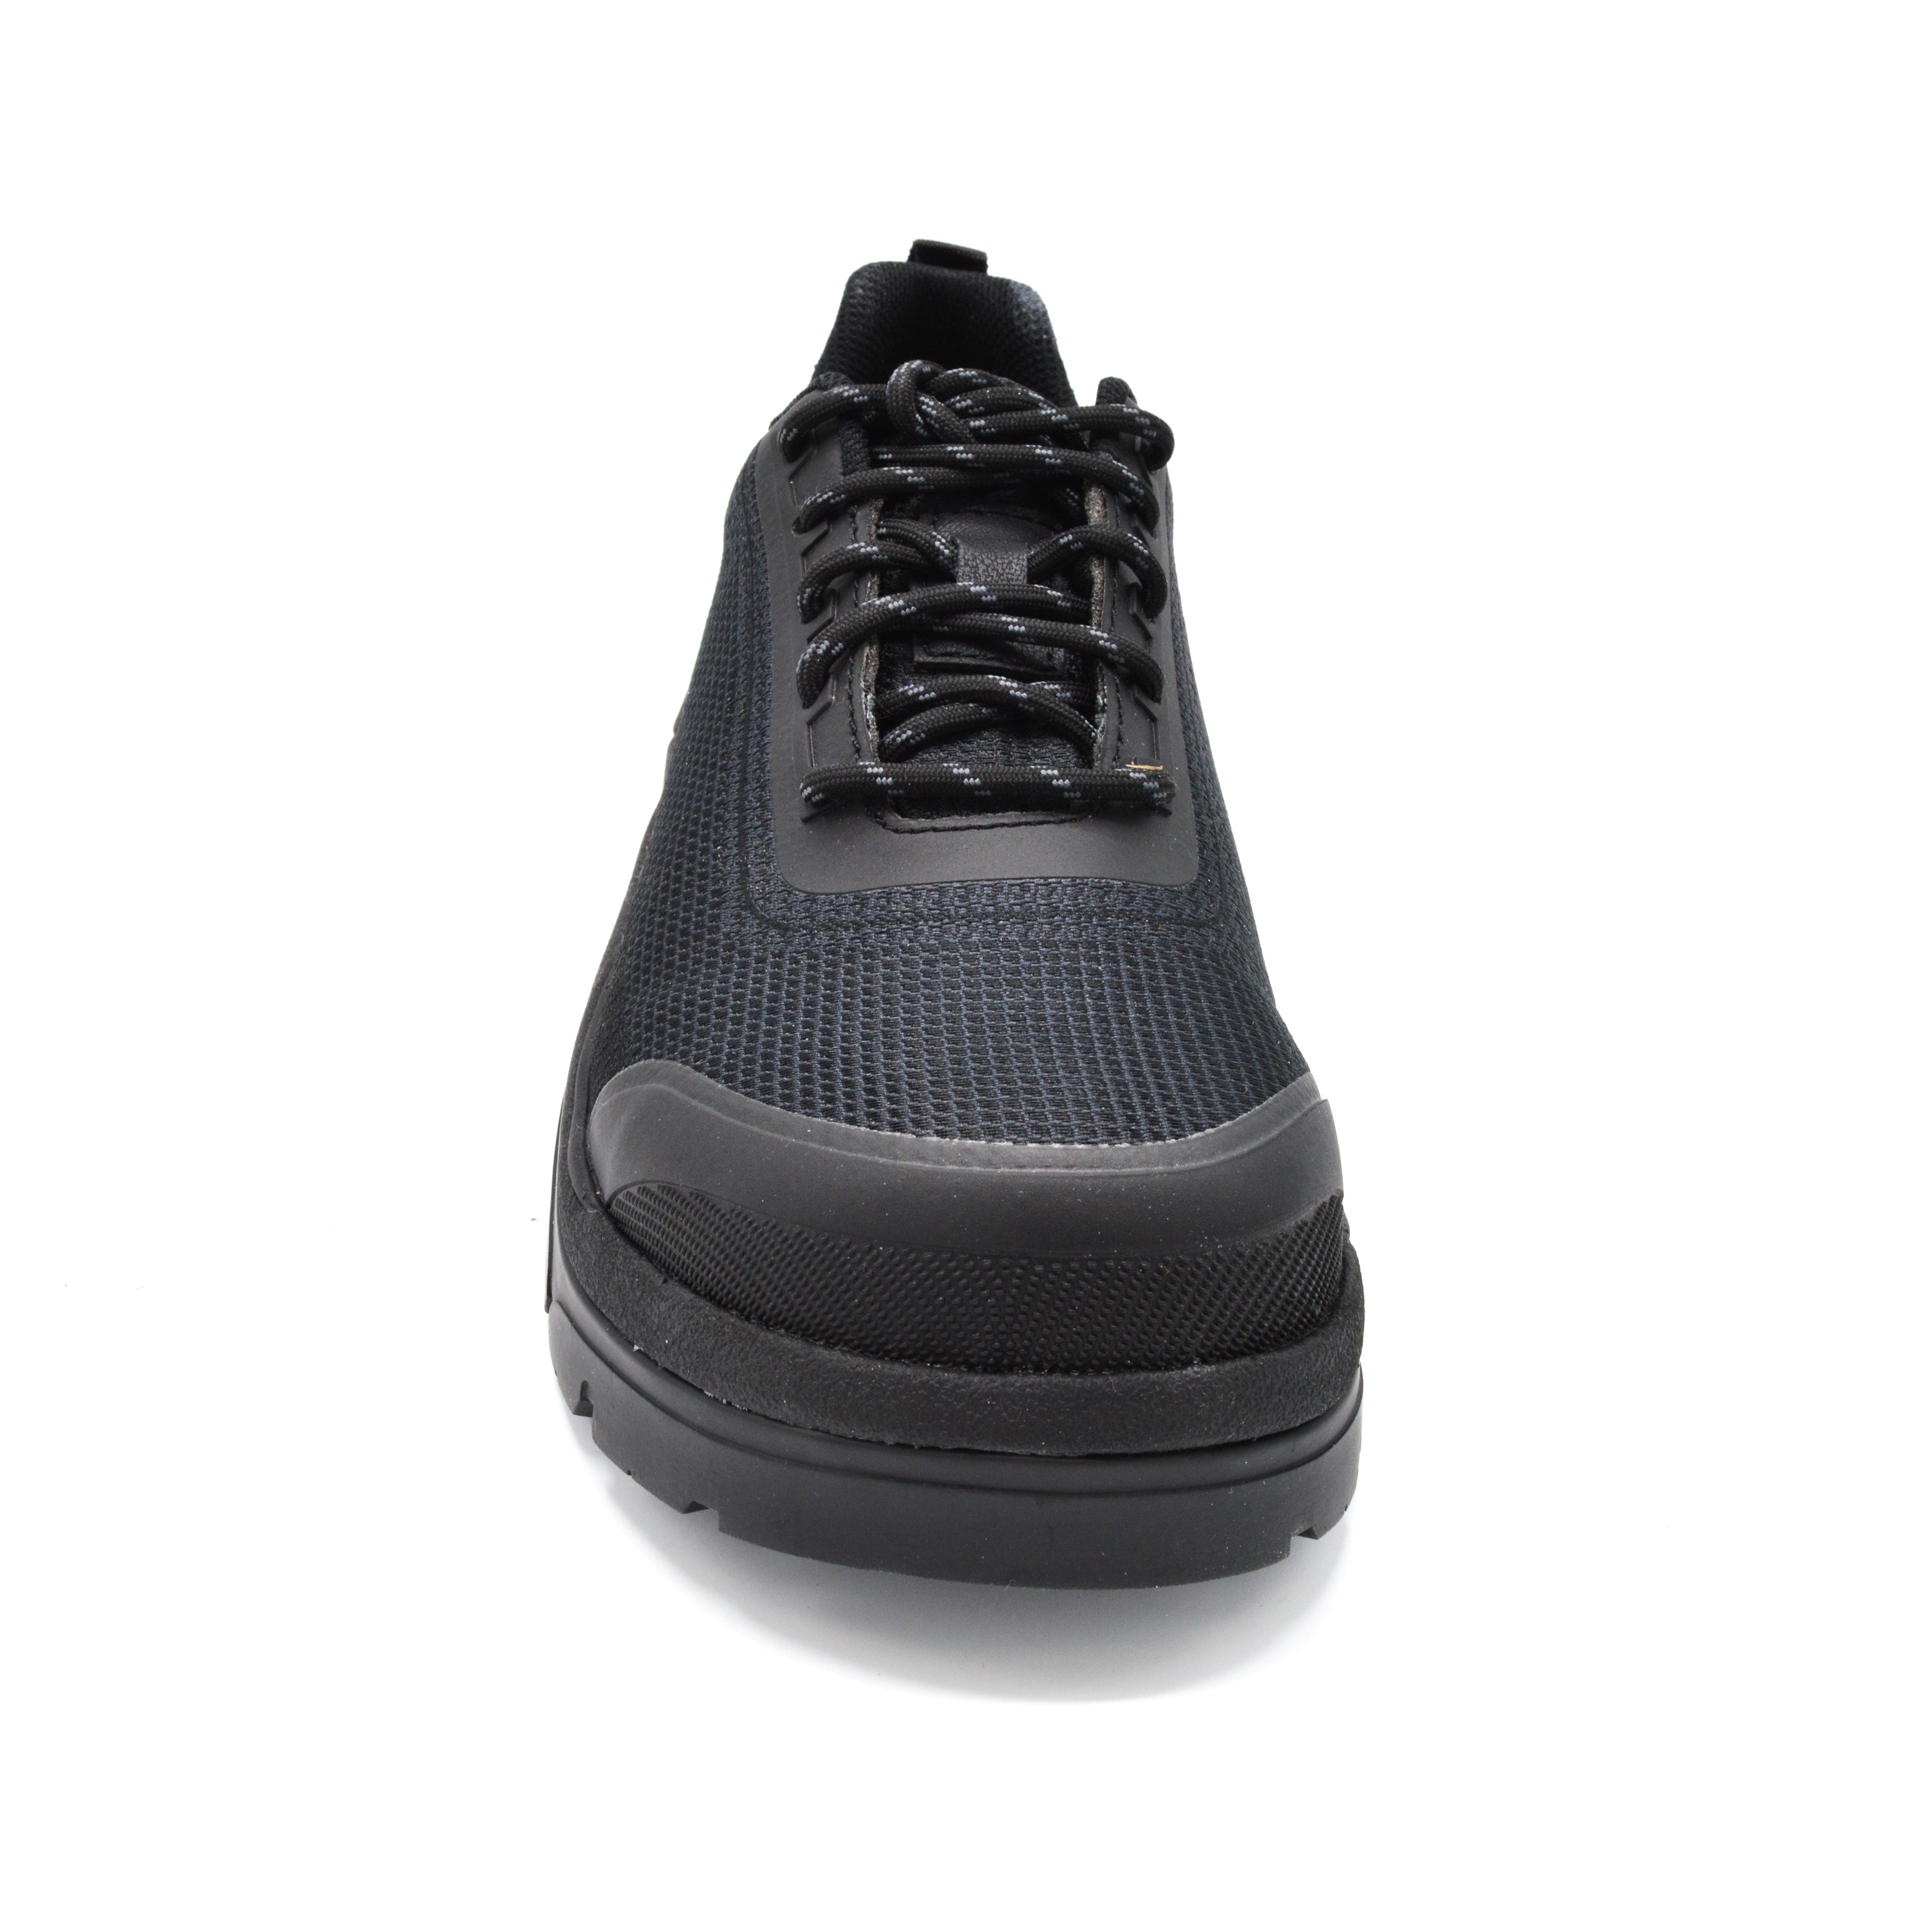 Extra Wide Safety Shoe Non Metal Toe